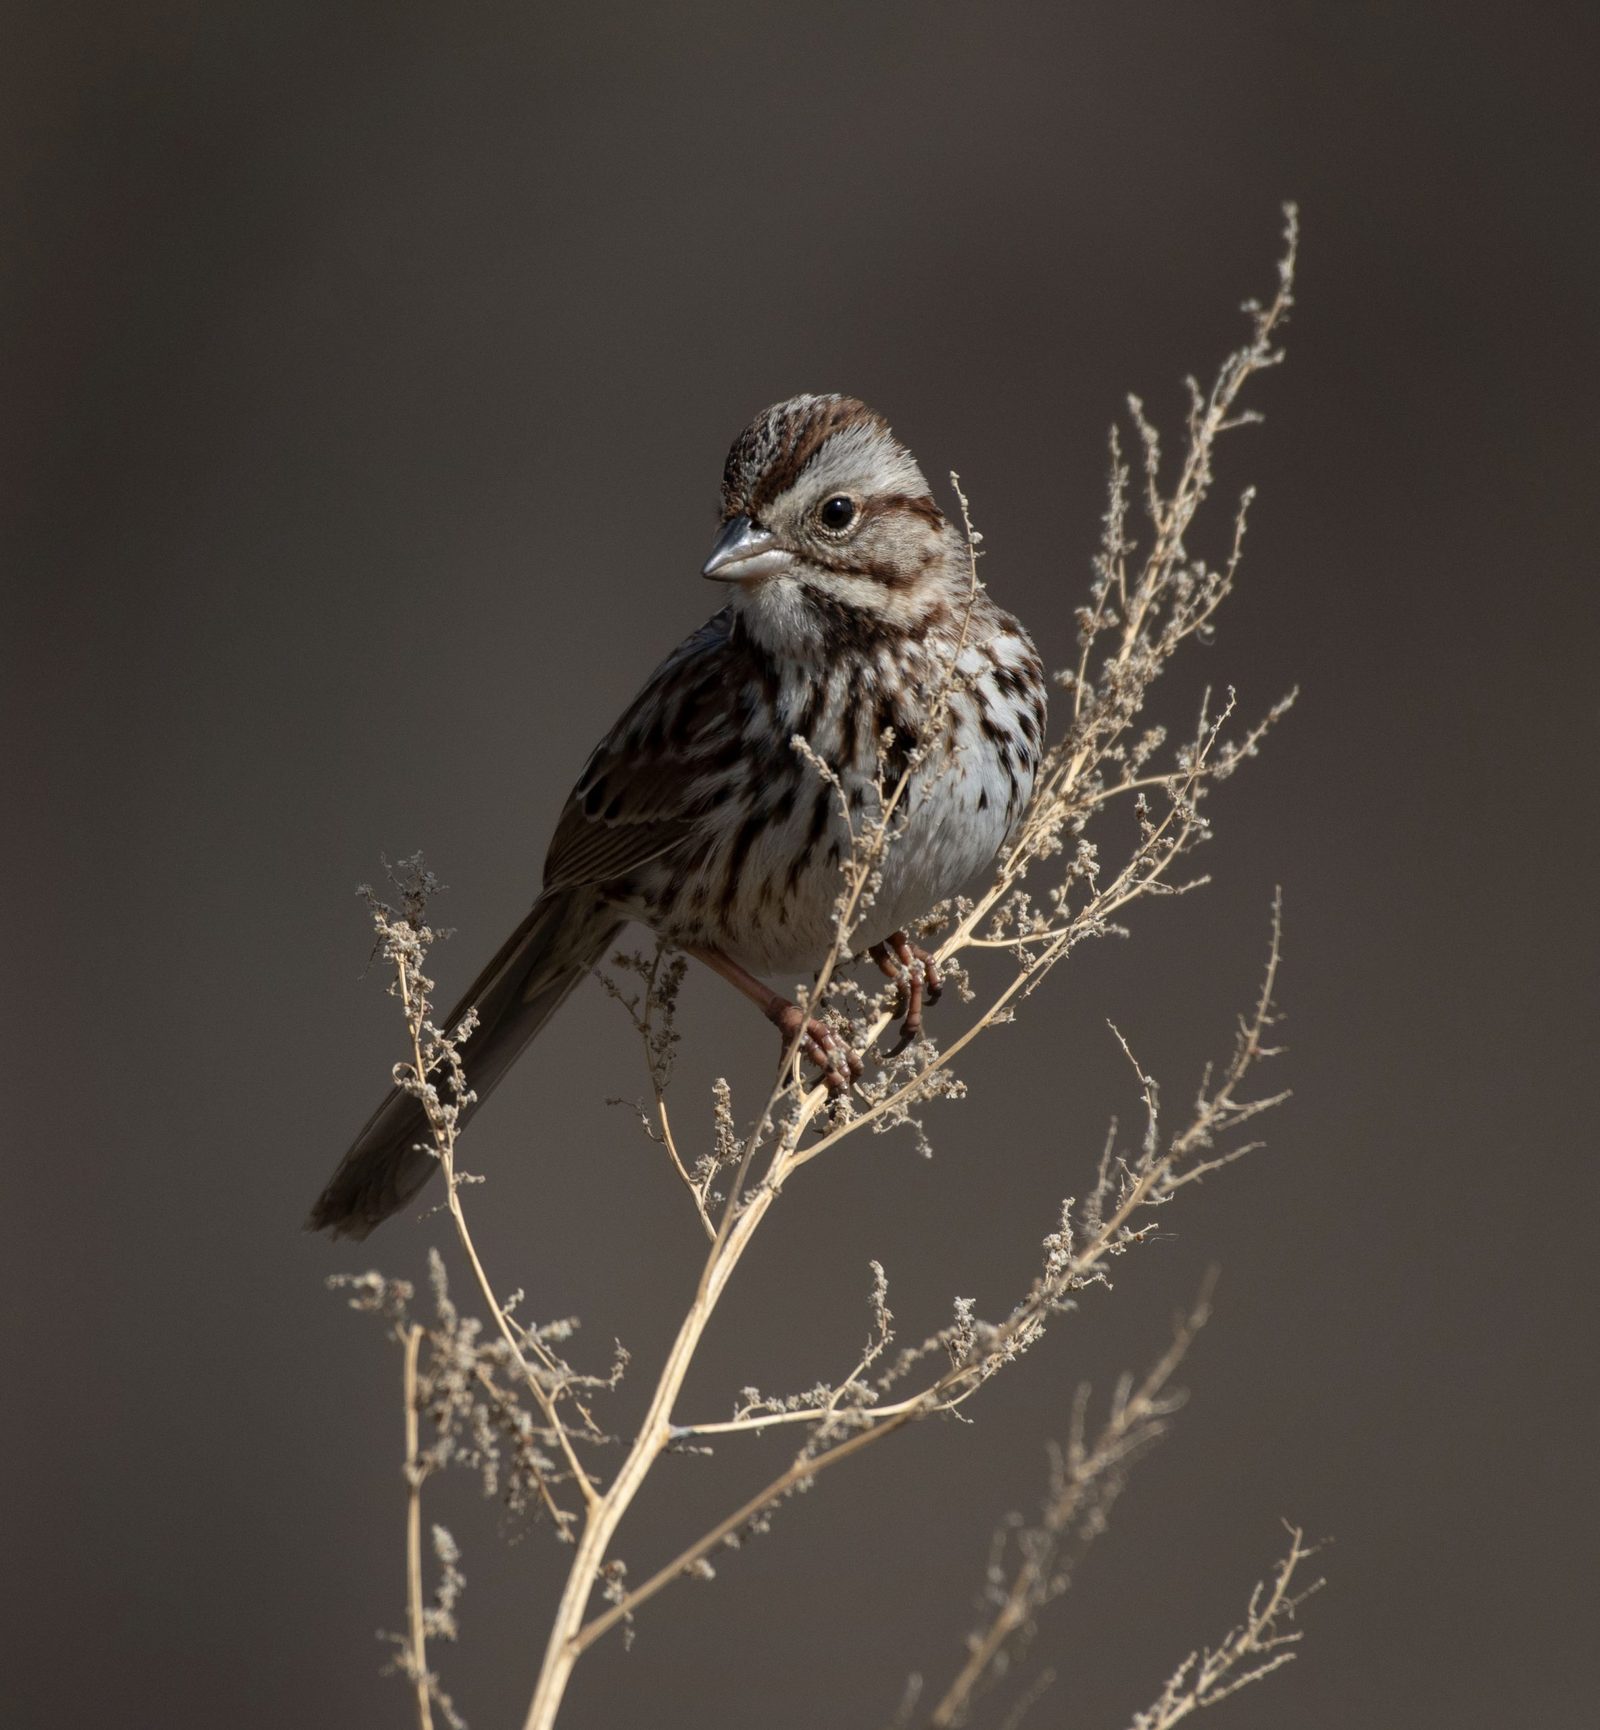 Bird photography is no joke -- especially when the bird you're trying to catch is the same exact color as its' environment! After an hour of this song sparrow trying to hide from me, it finally flew to a tall twig, making for a pretty cool shot.